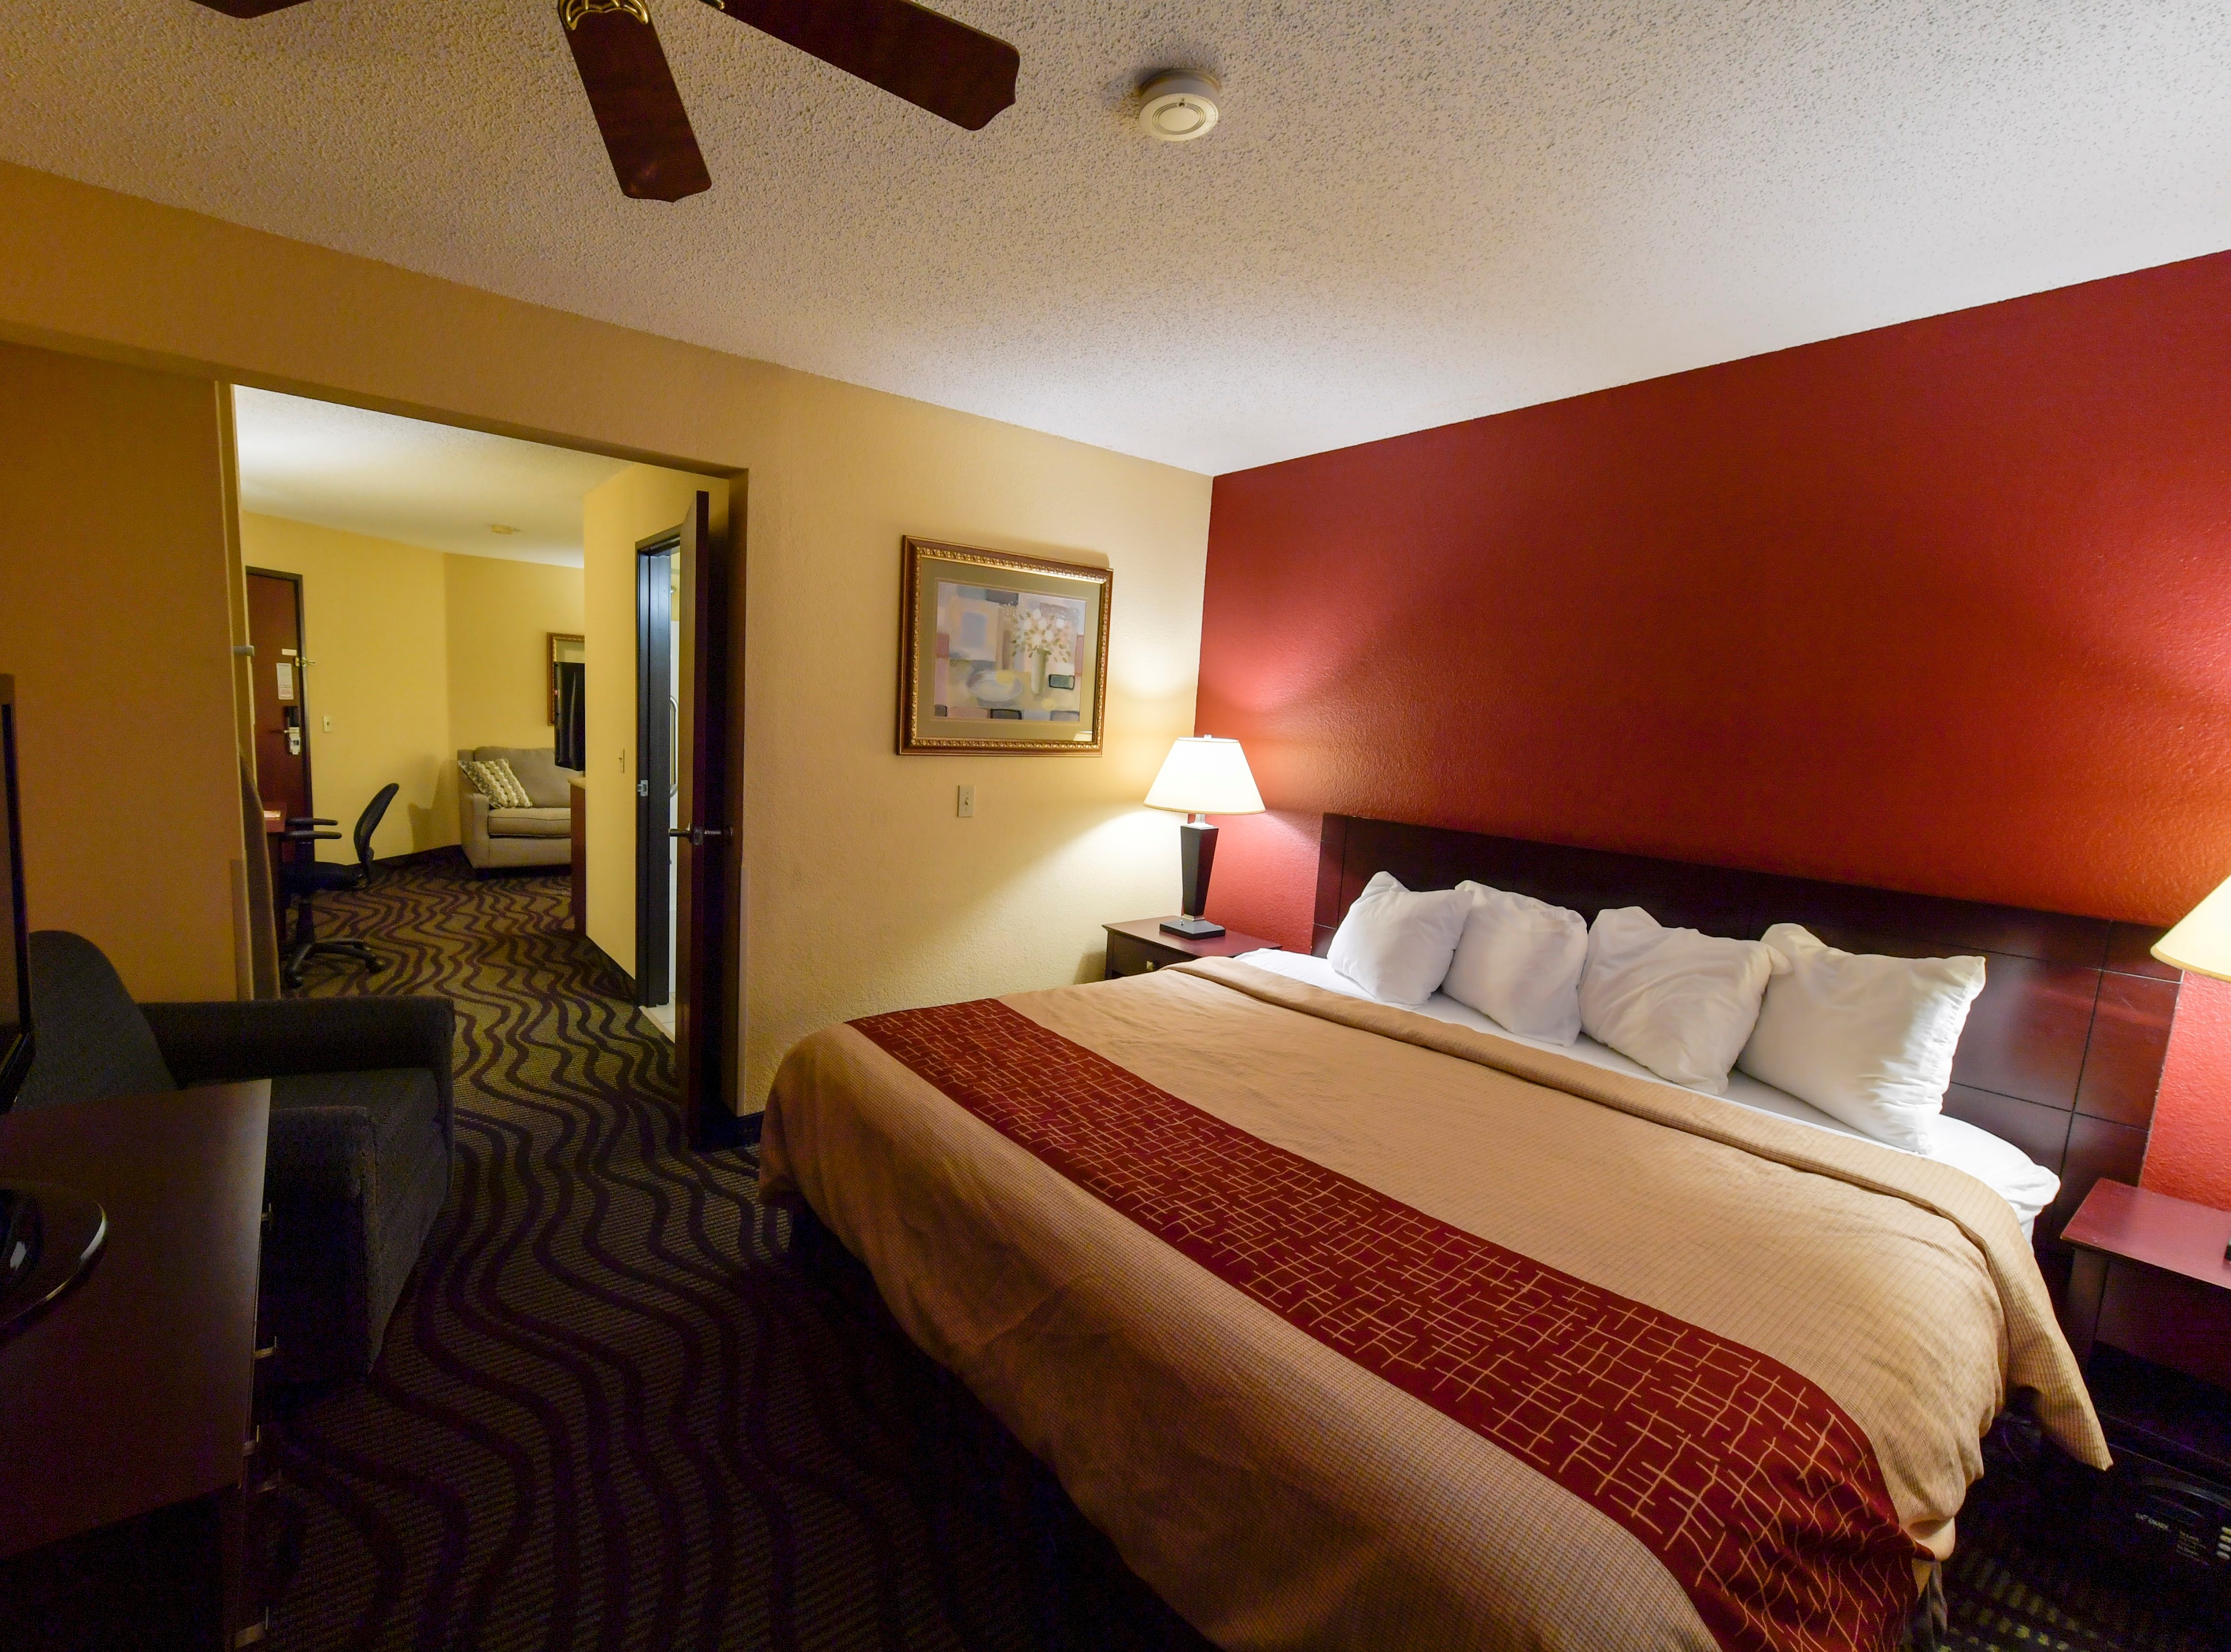 Red Roof Inn & Suites Lincoln Lincoln (402)477-1100